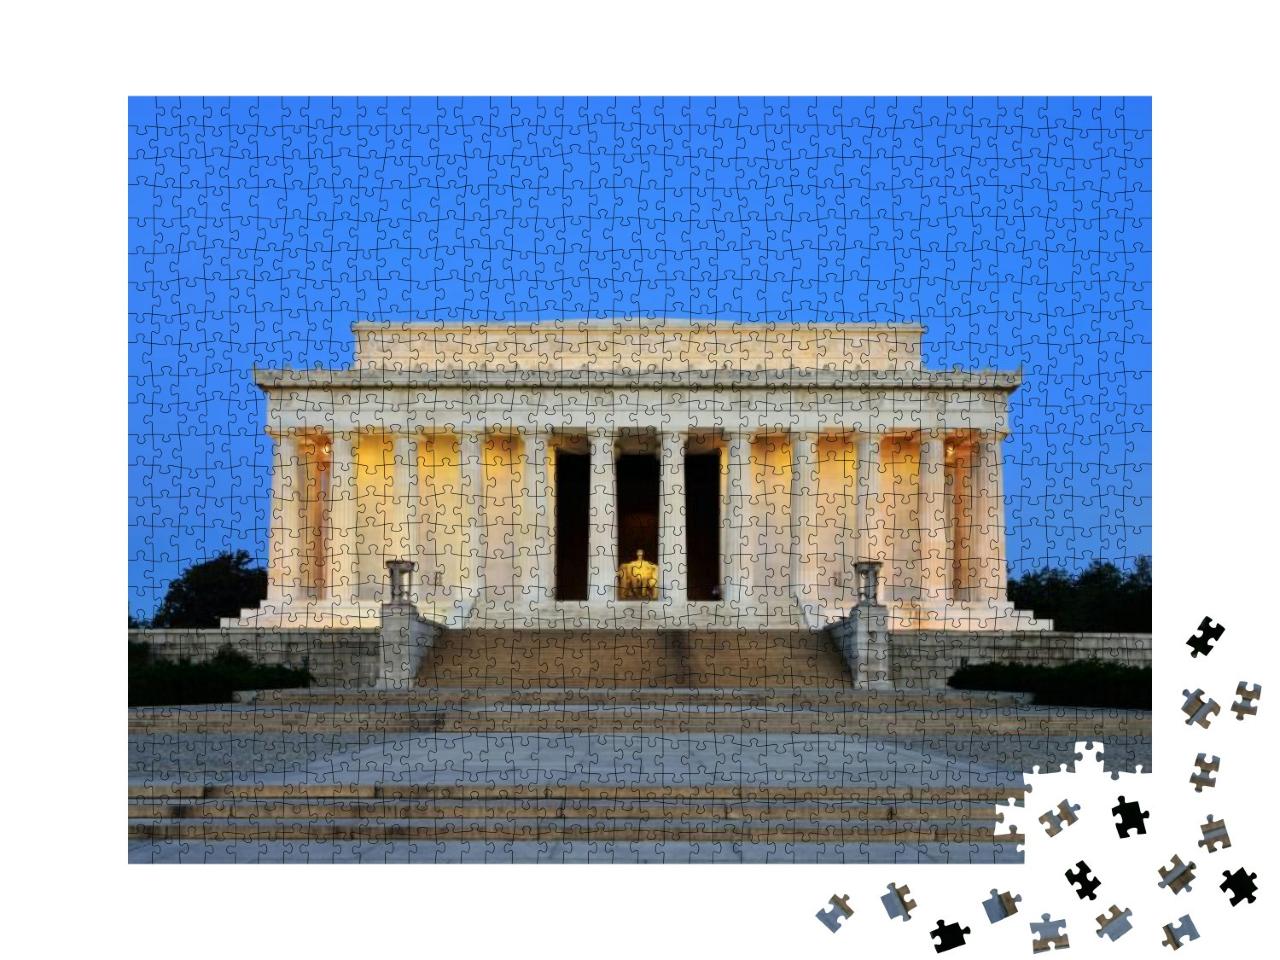 Lincoln Memorial At Dawn... Jigsaw Puzzle with 1000 pieces